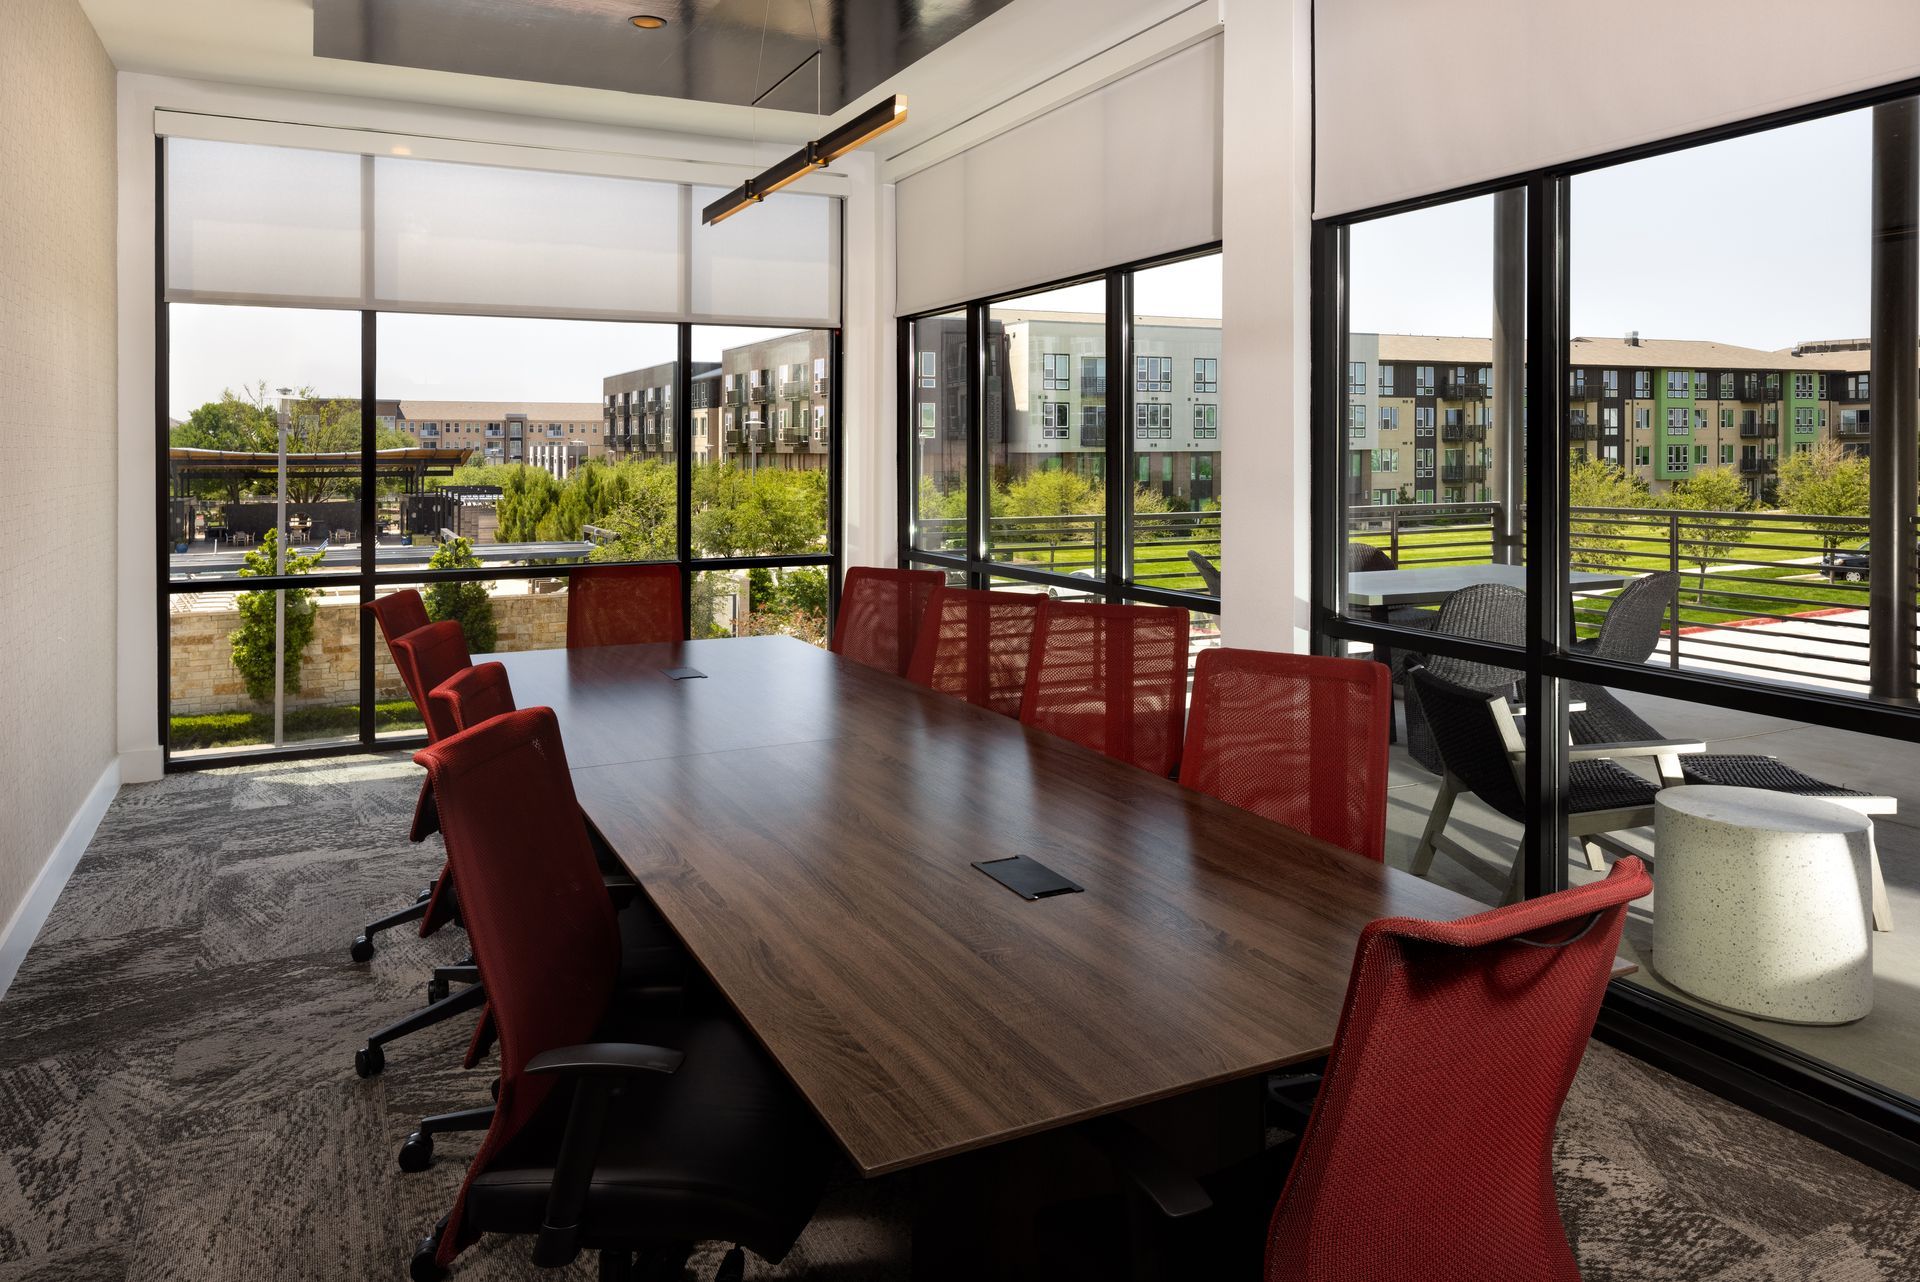 A conference room with a long table and red chairs at Parkside at Craig Ranch.